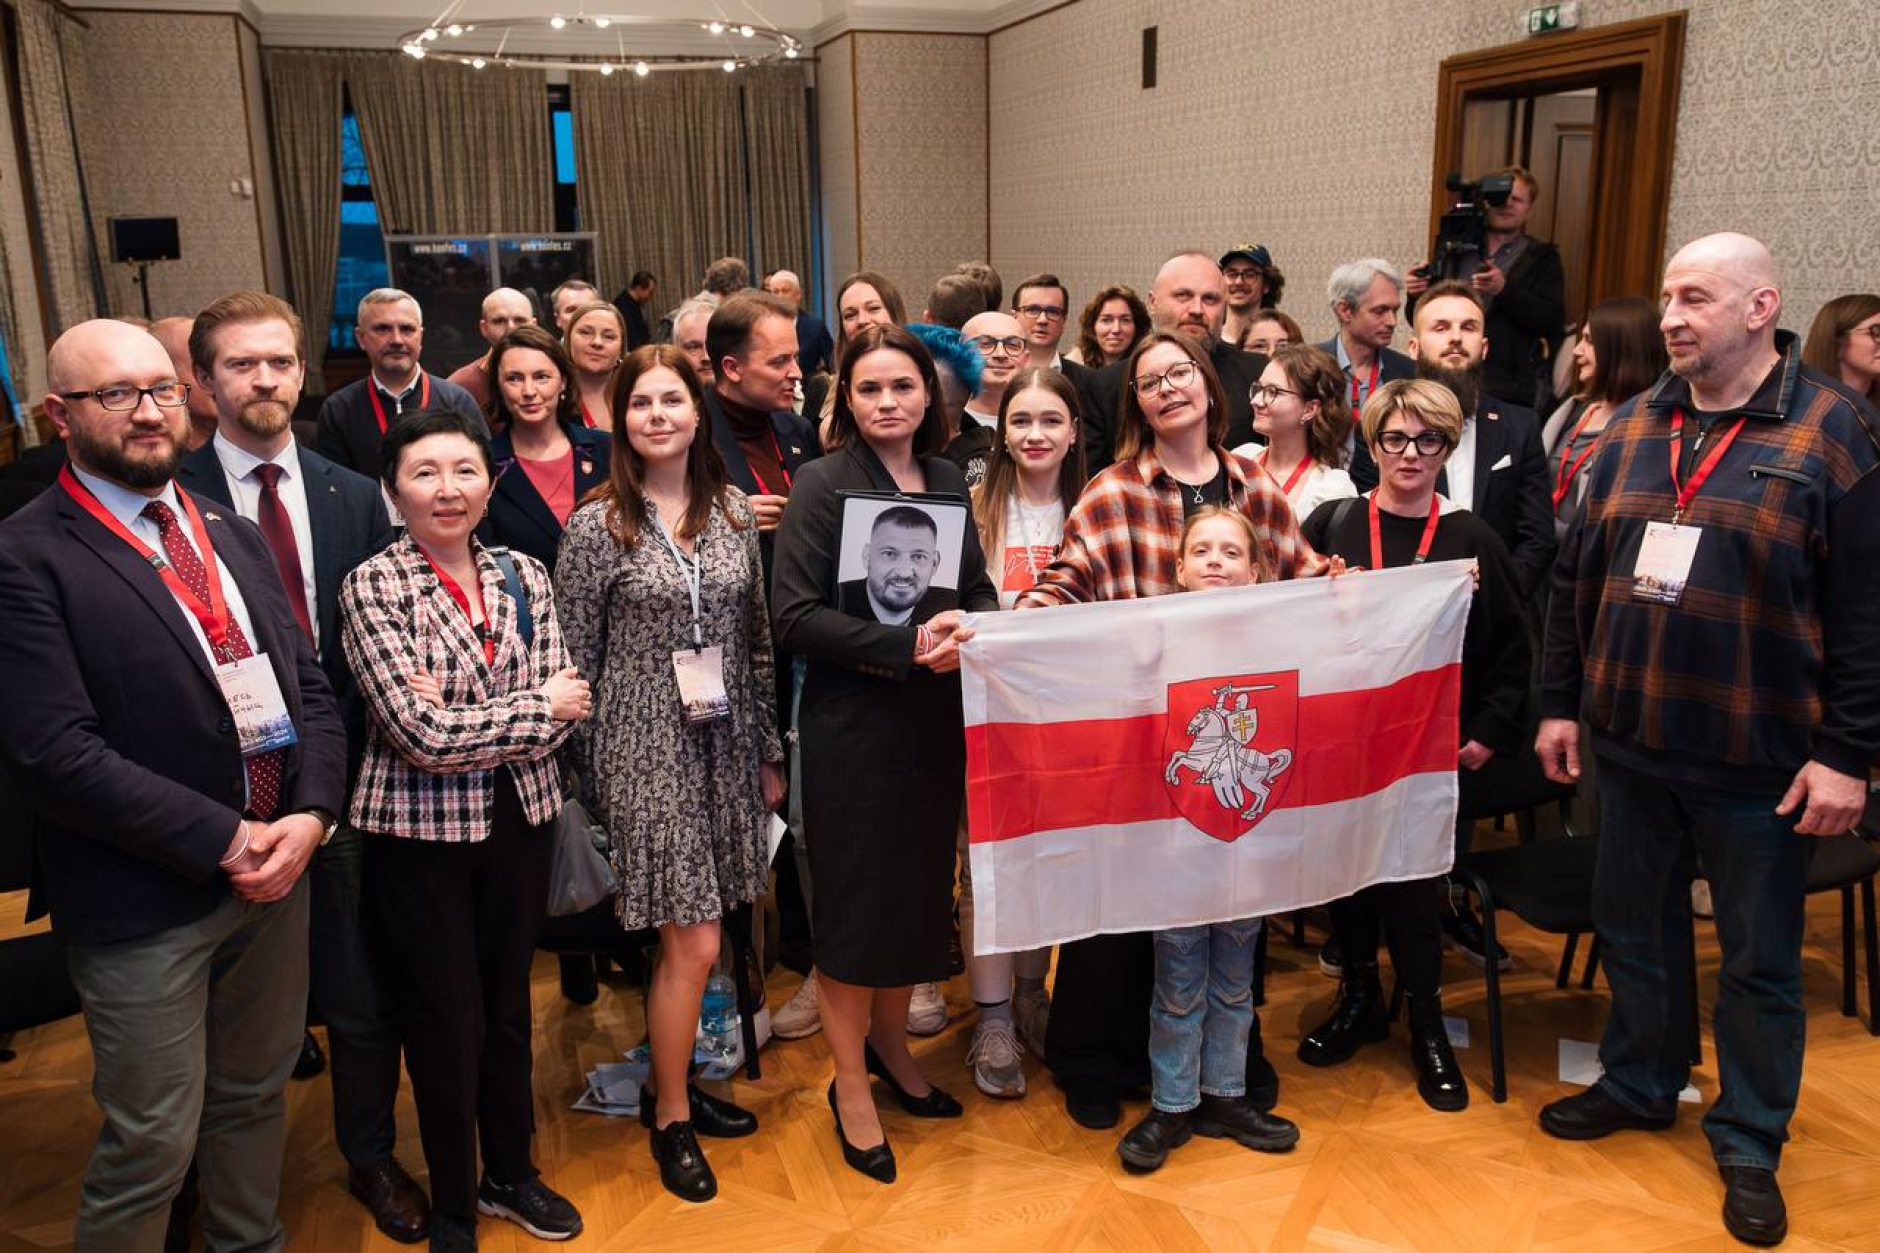 III conference of Belarusians of the world - together for a better future of Belarus